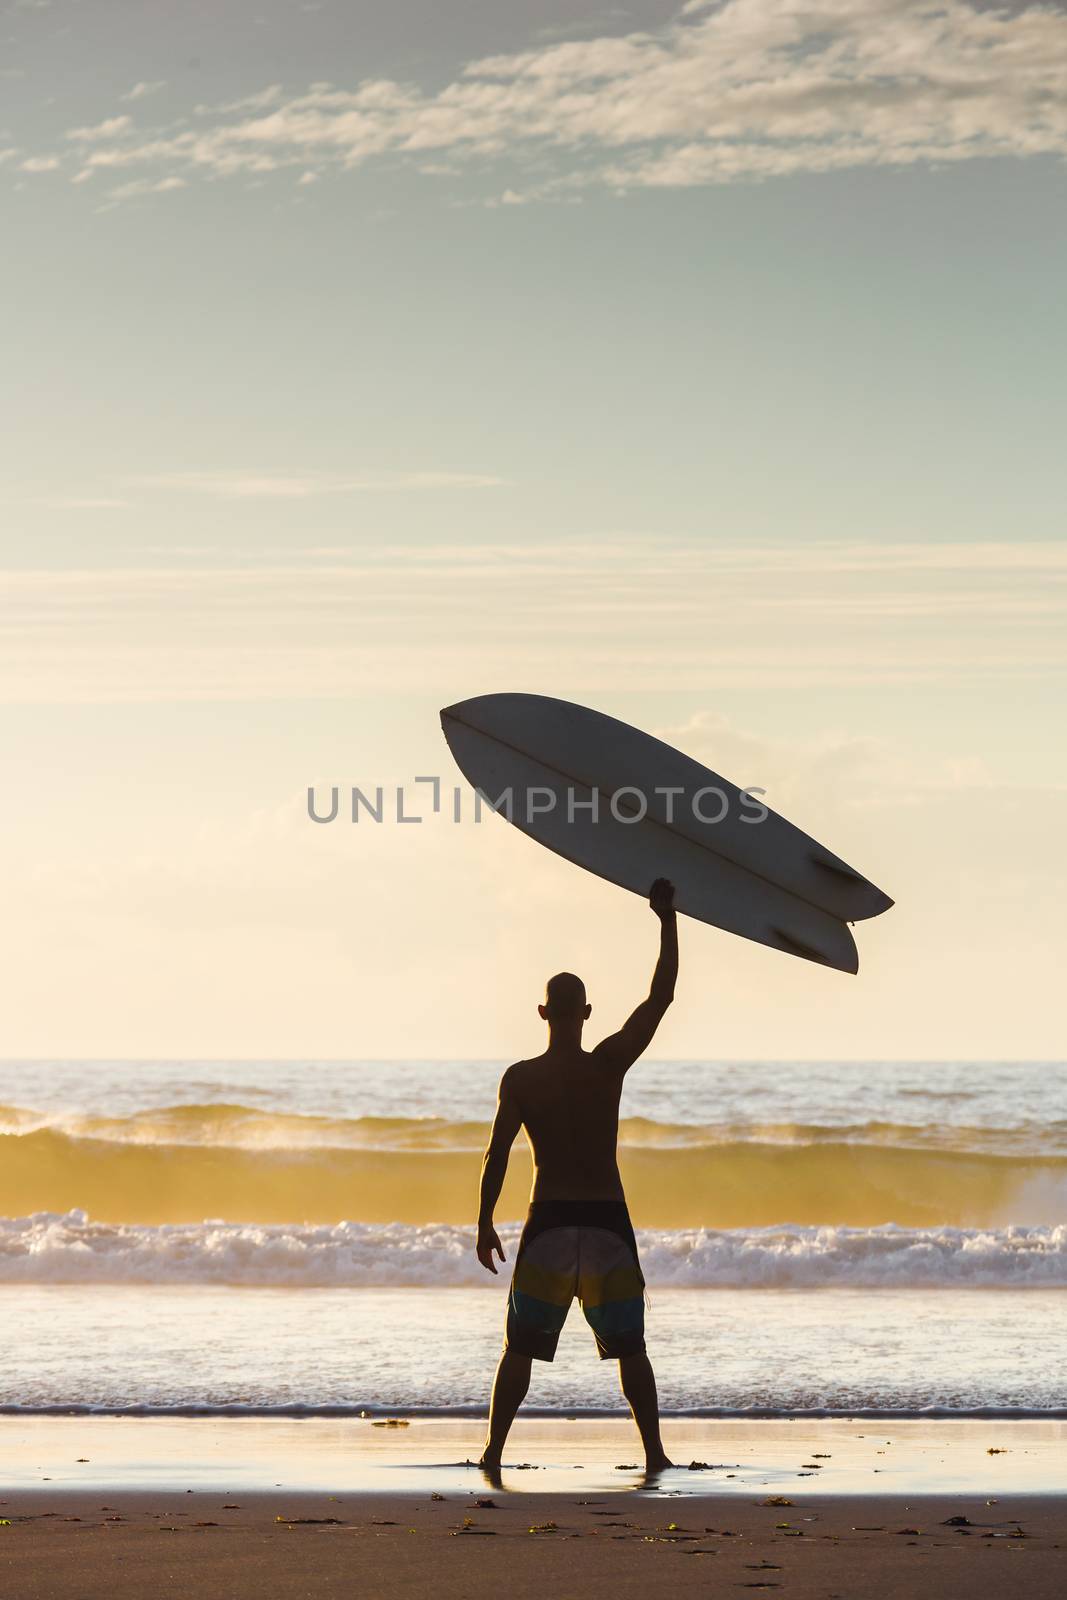 Let's Surf by Iko